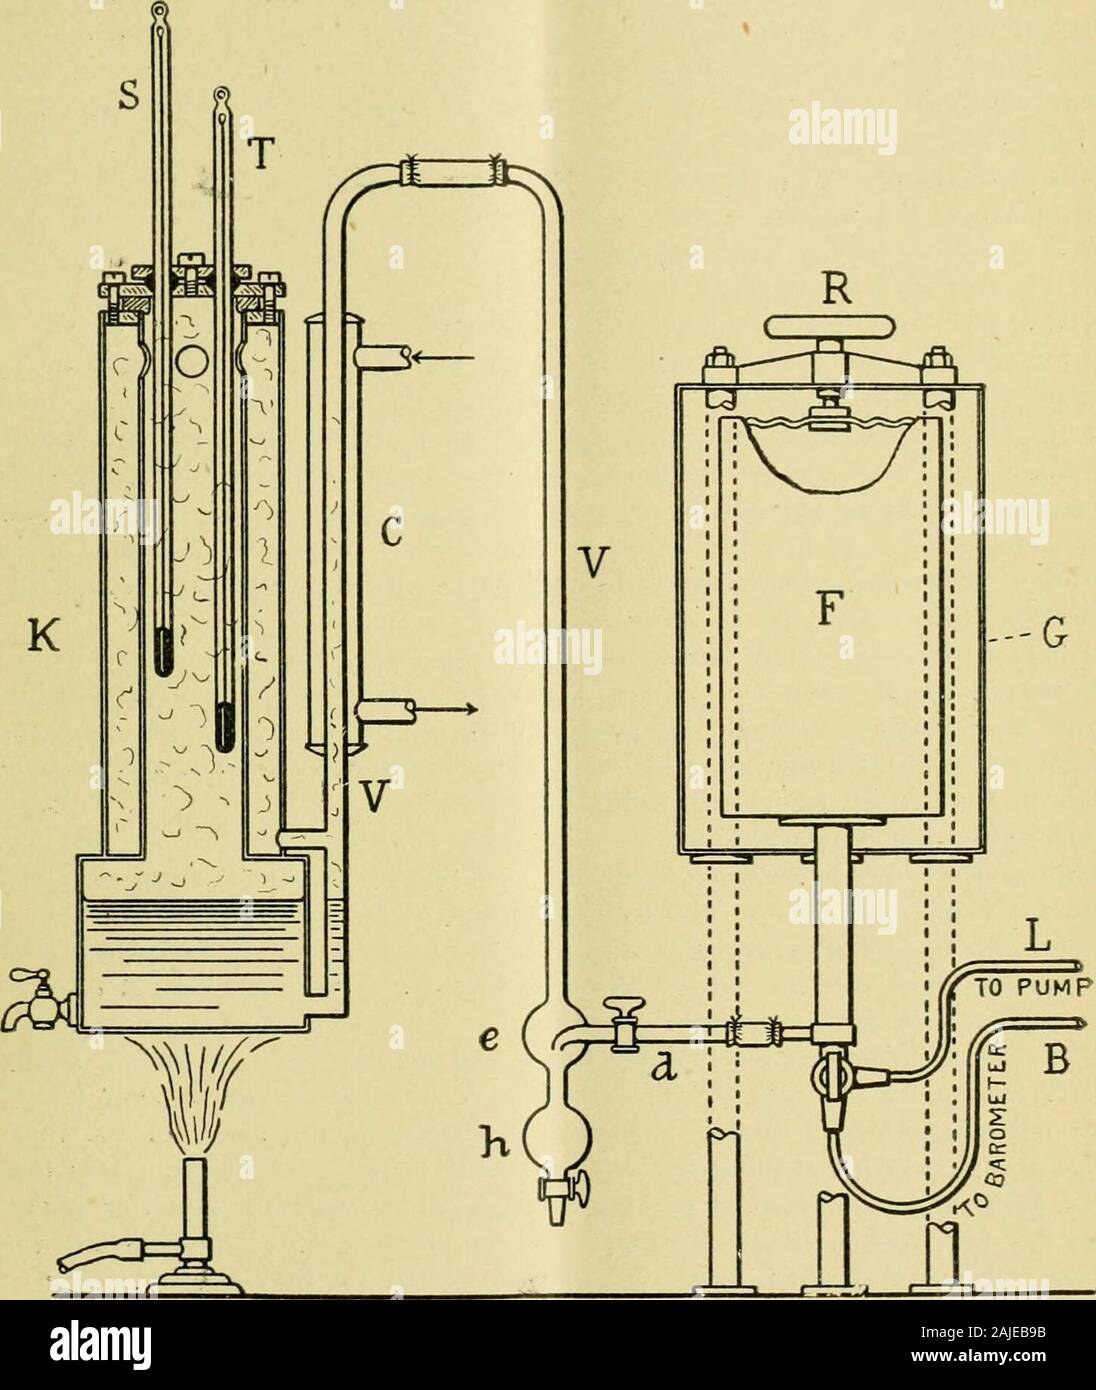 The Locomotive . e, of the German Physikalisch-Technische Reichsanstalt. extending from 82 ° C. to ioo° C. (180° to 2120 Fahr. 1.and described in the Zcitschrift fur Instrumcntcnkundc. Vol. 13, September. tRq.;.page 329. and (2) a series bv M. Thiesen and K. Scheel, extending from— ri° C.to +250 C. (120 to 77° Fahr.). and described in the same journal for June.toot. Vol. 2T. page 17s, and more fully in the Wissenschaftliche Abhandlungenof the Reichsanstalt. Vol. 3. tqoo. piee j. We understand that observations,handed to be of a simibr rH»r of accuracy, have liven made by Chappuis; 1907-] THE Stock Photo